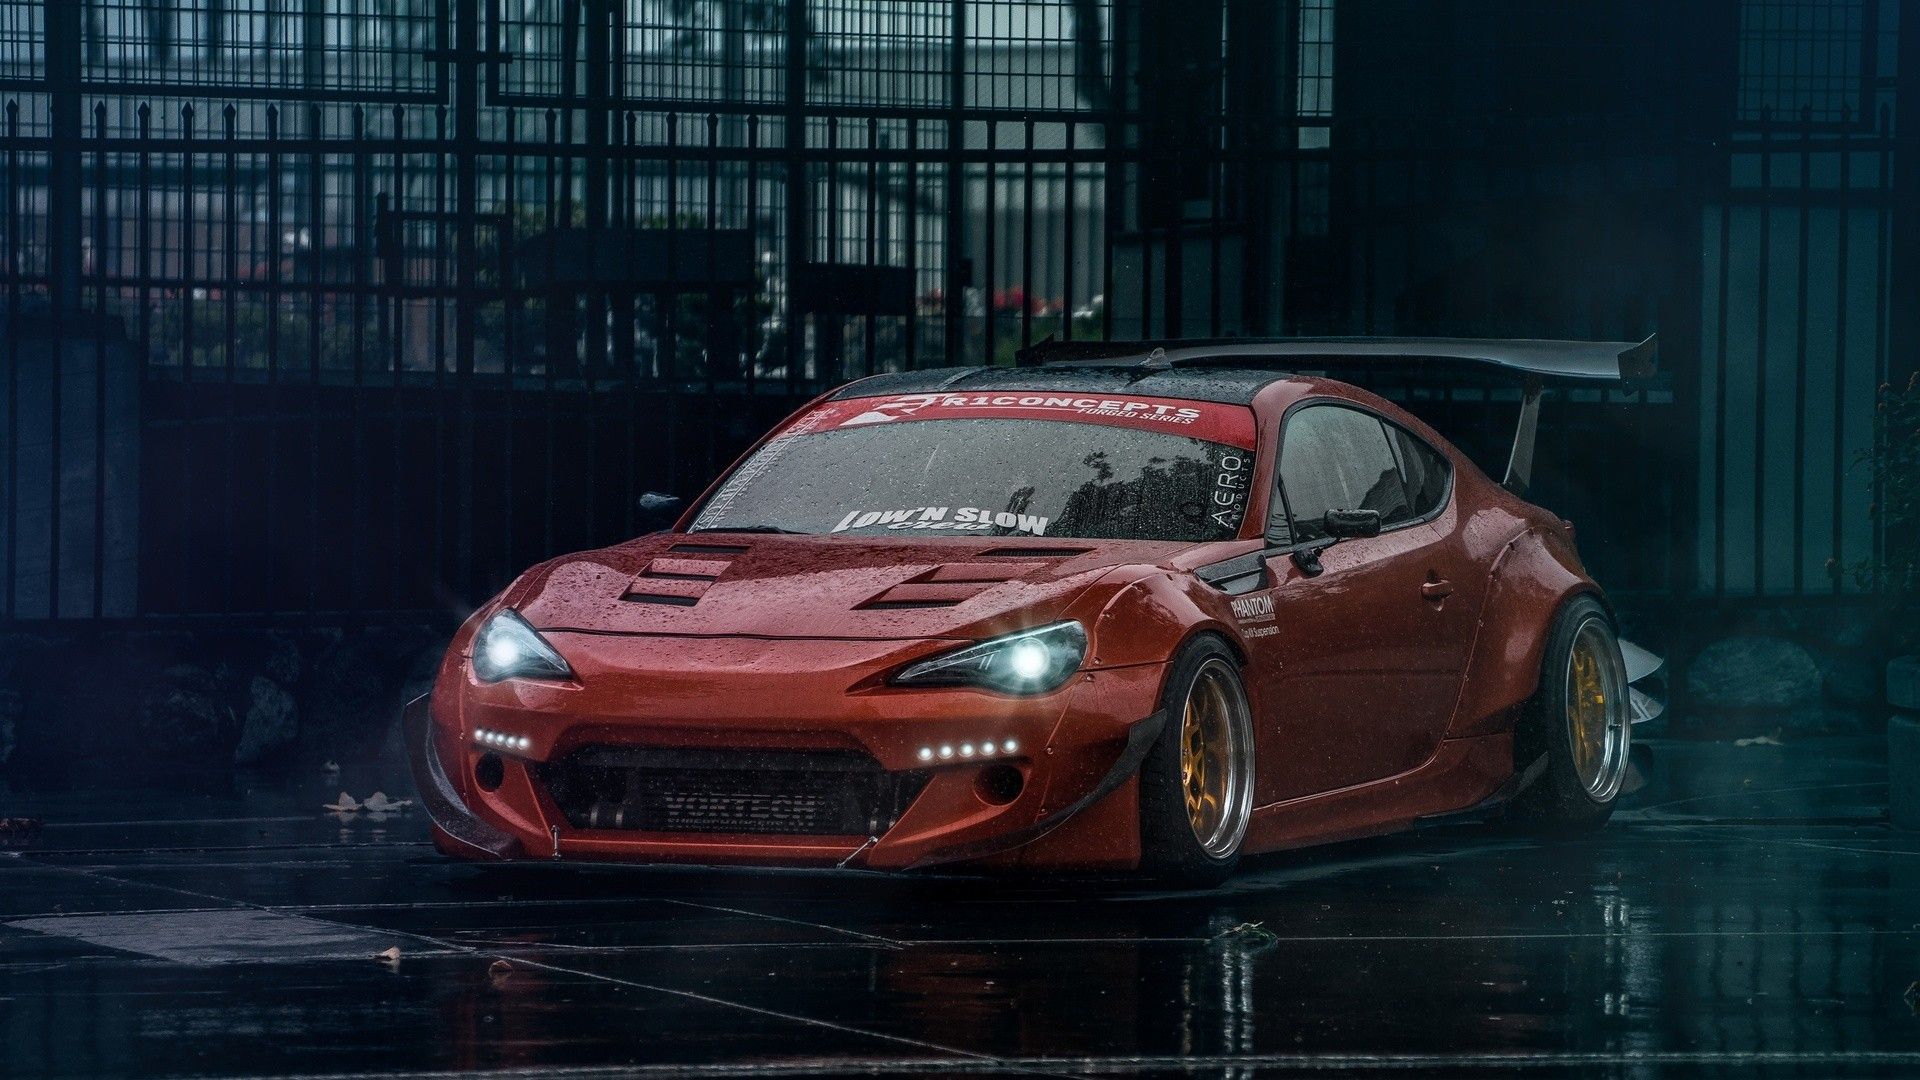 car, Toyota, Tuning, Scion FR S, Subaru BRZ, Stance, Red Cars Wallpaper HD / Desktop and Mobile Background